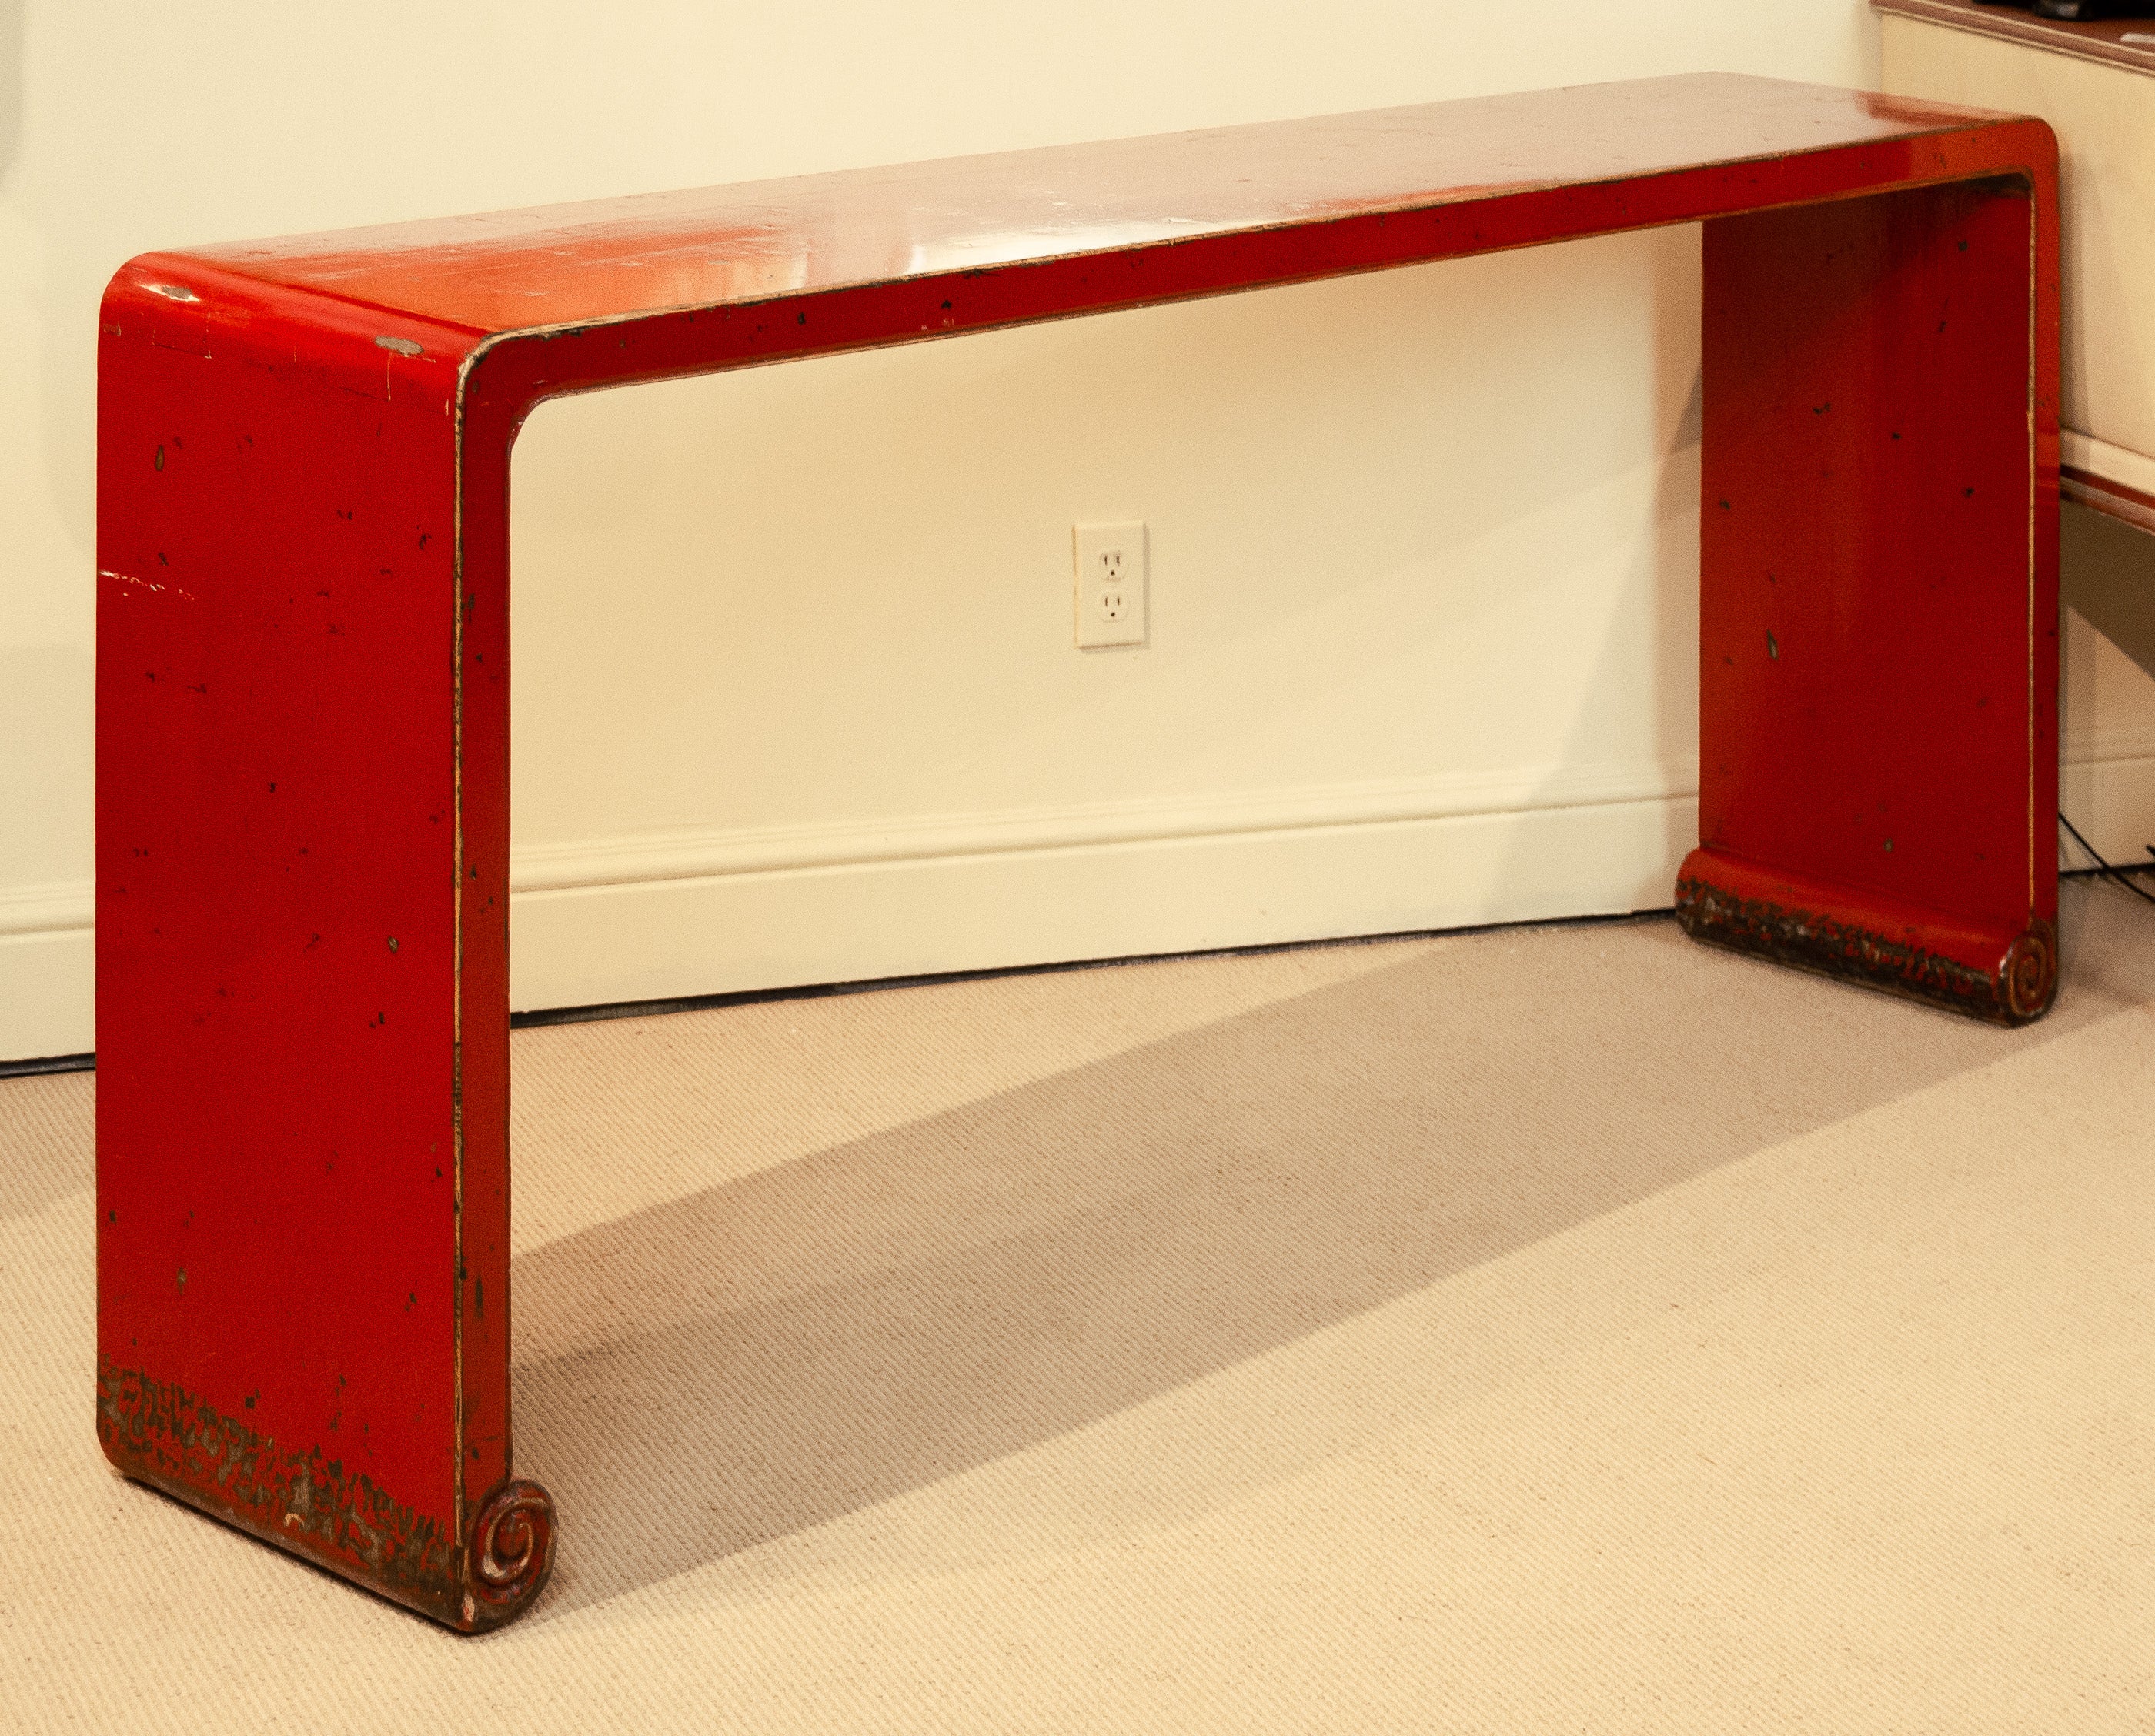 Red Lacquer Distressed Finish Chinoiserie Console